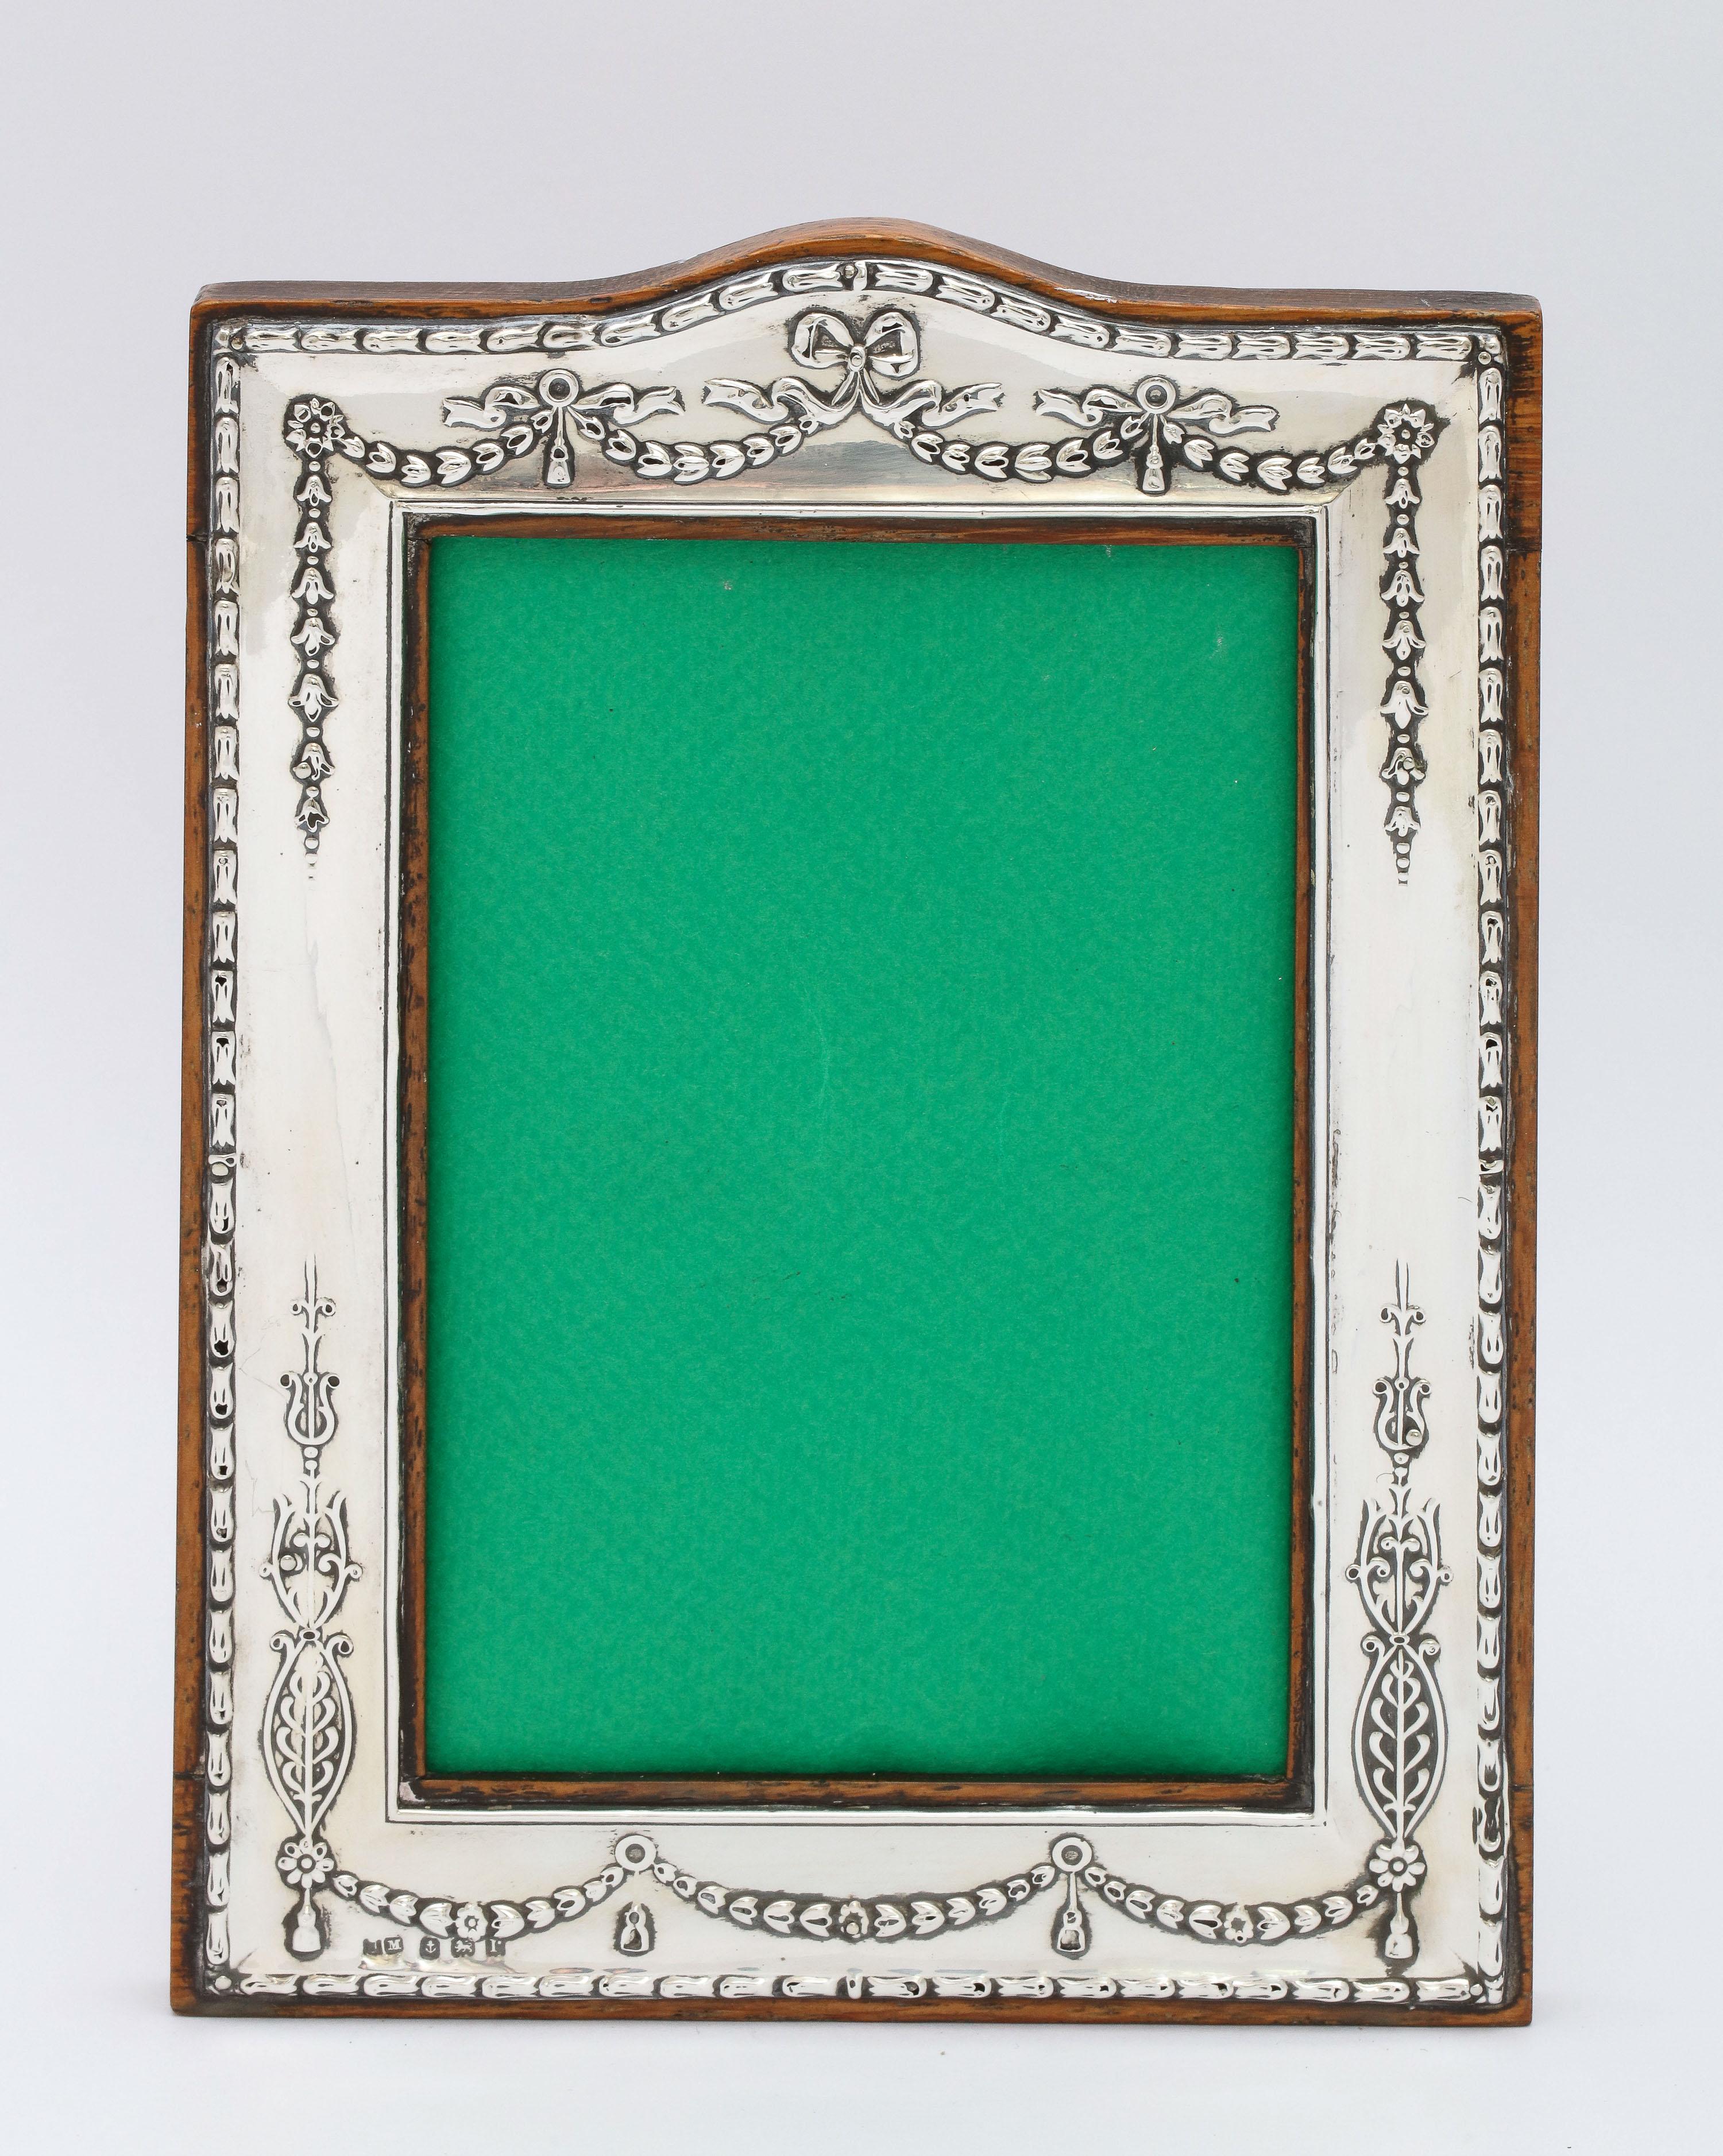 Edwardian, sterling silver, wood-backed picture frame, Birmingham, England, year-hallmarked for 1916, H. Matthews - maker. Decorated with garlands and bows. Measures 7 3/4 inches high (at highest point) x 5 3/4 inches wide (at widest point) x 5